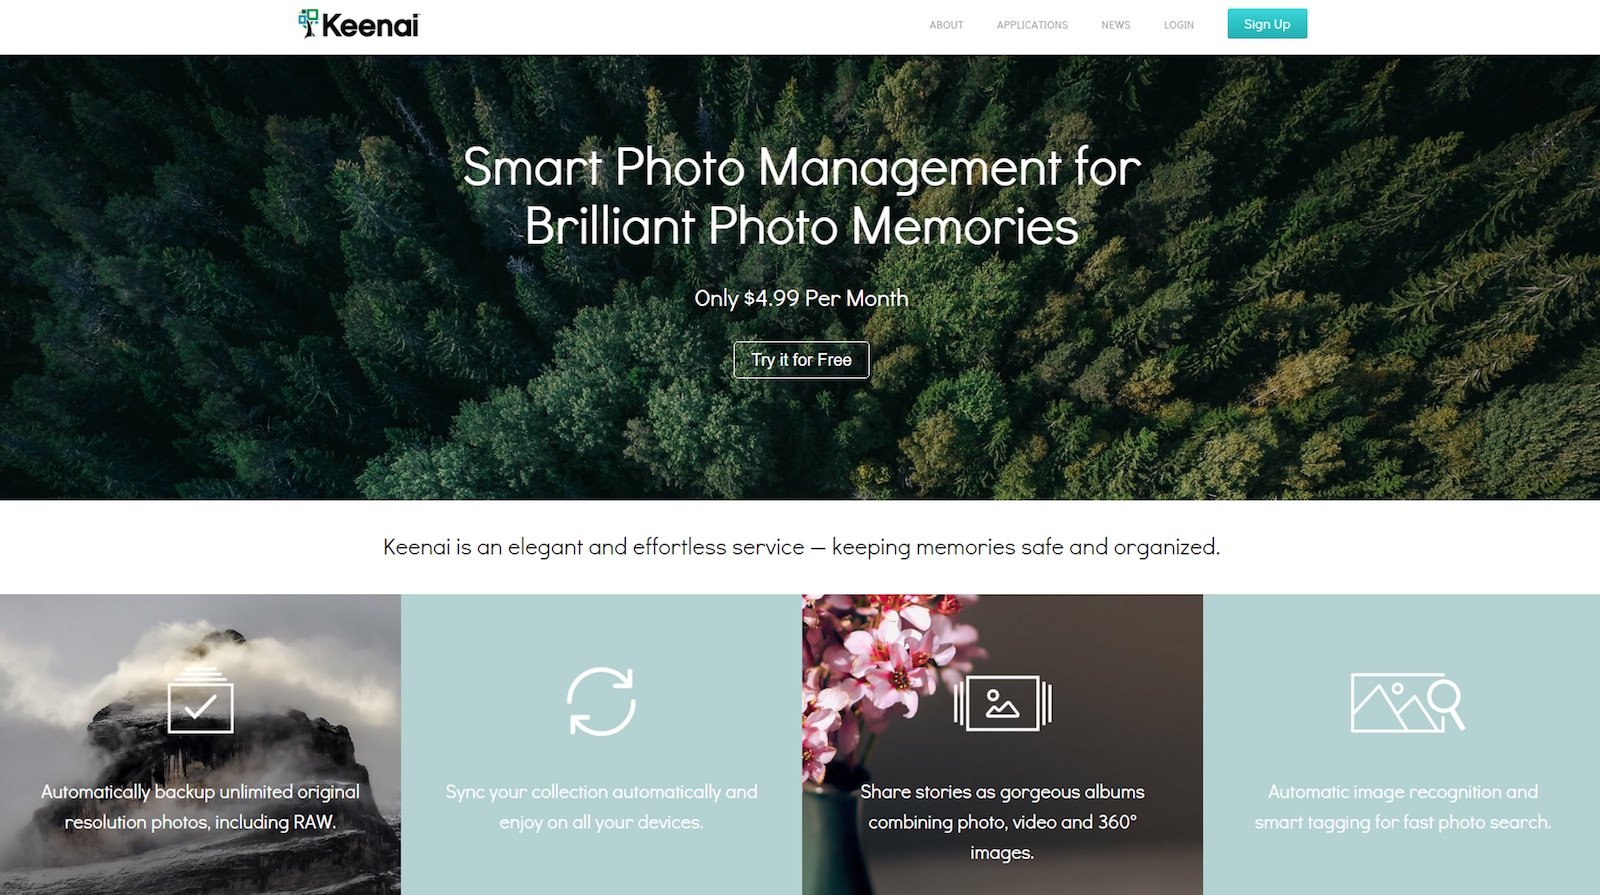 Ricoh Takes On Google with Its New Photo Management Service Keenai